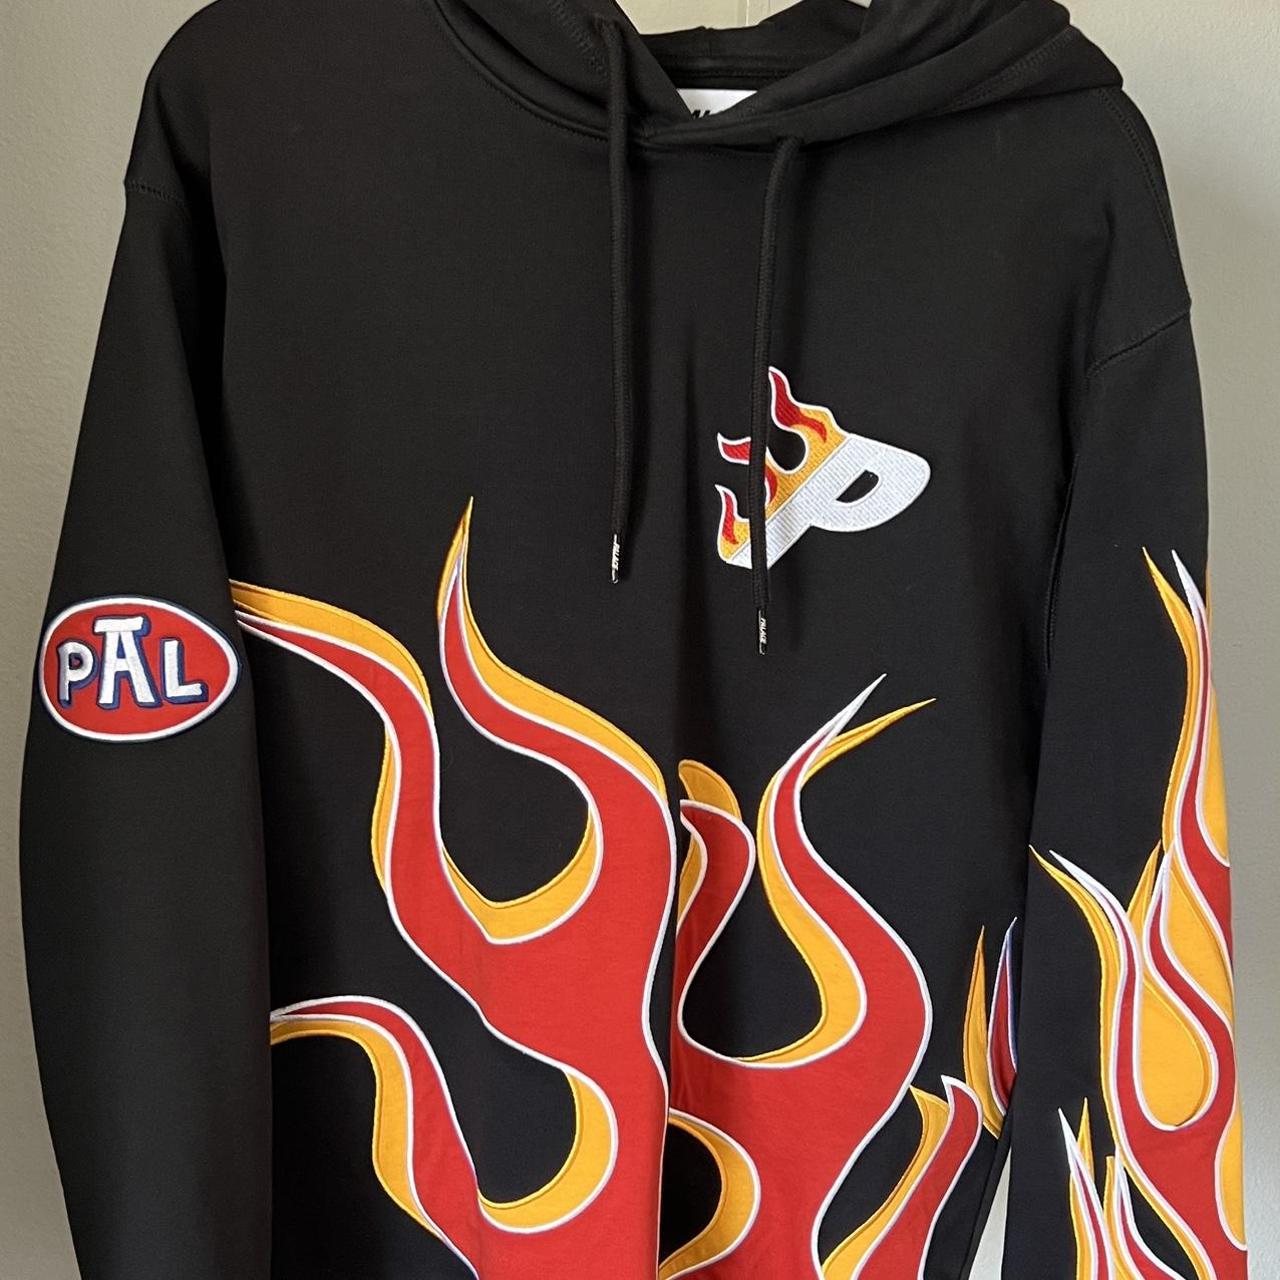 Black palace flame hoodie from ss22. Worn only a few...